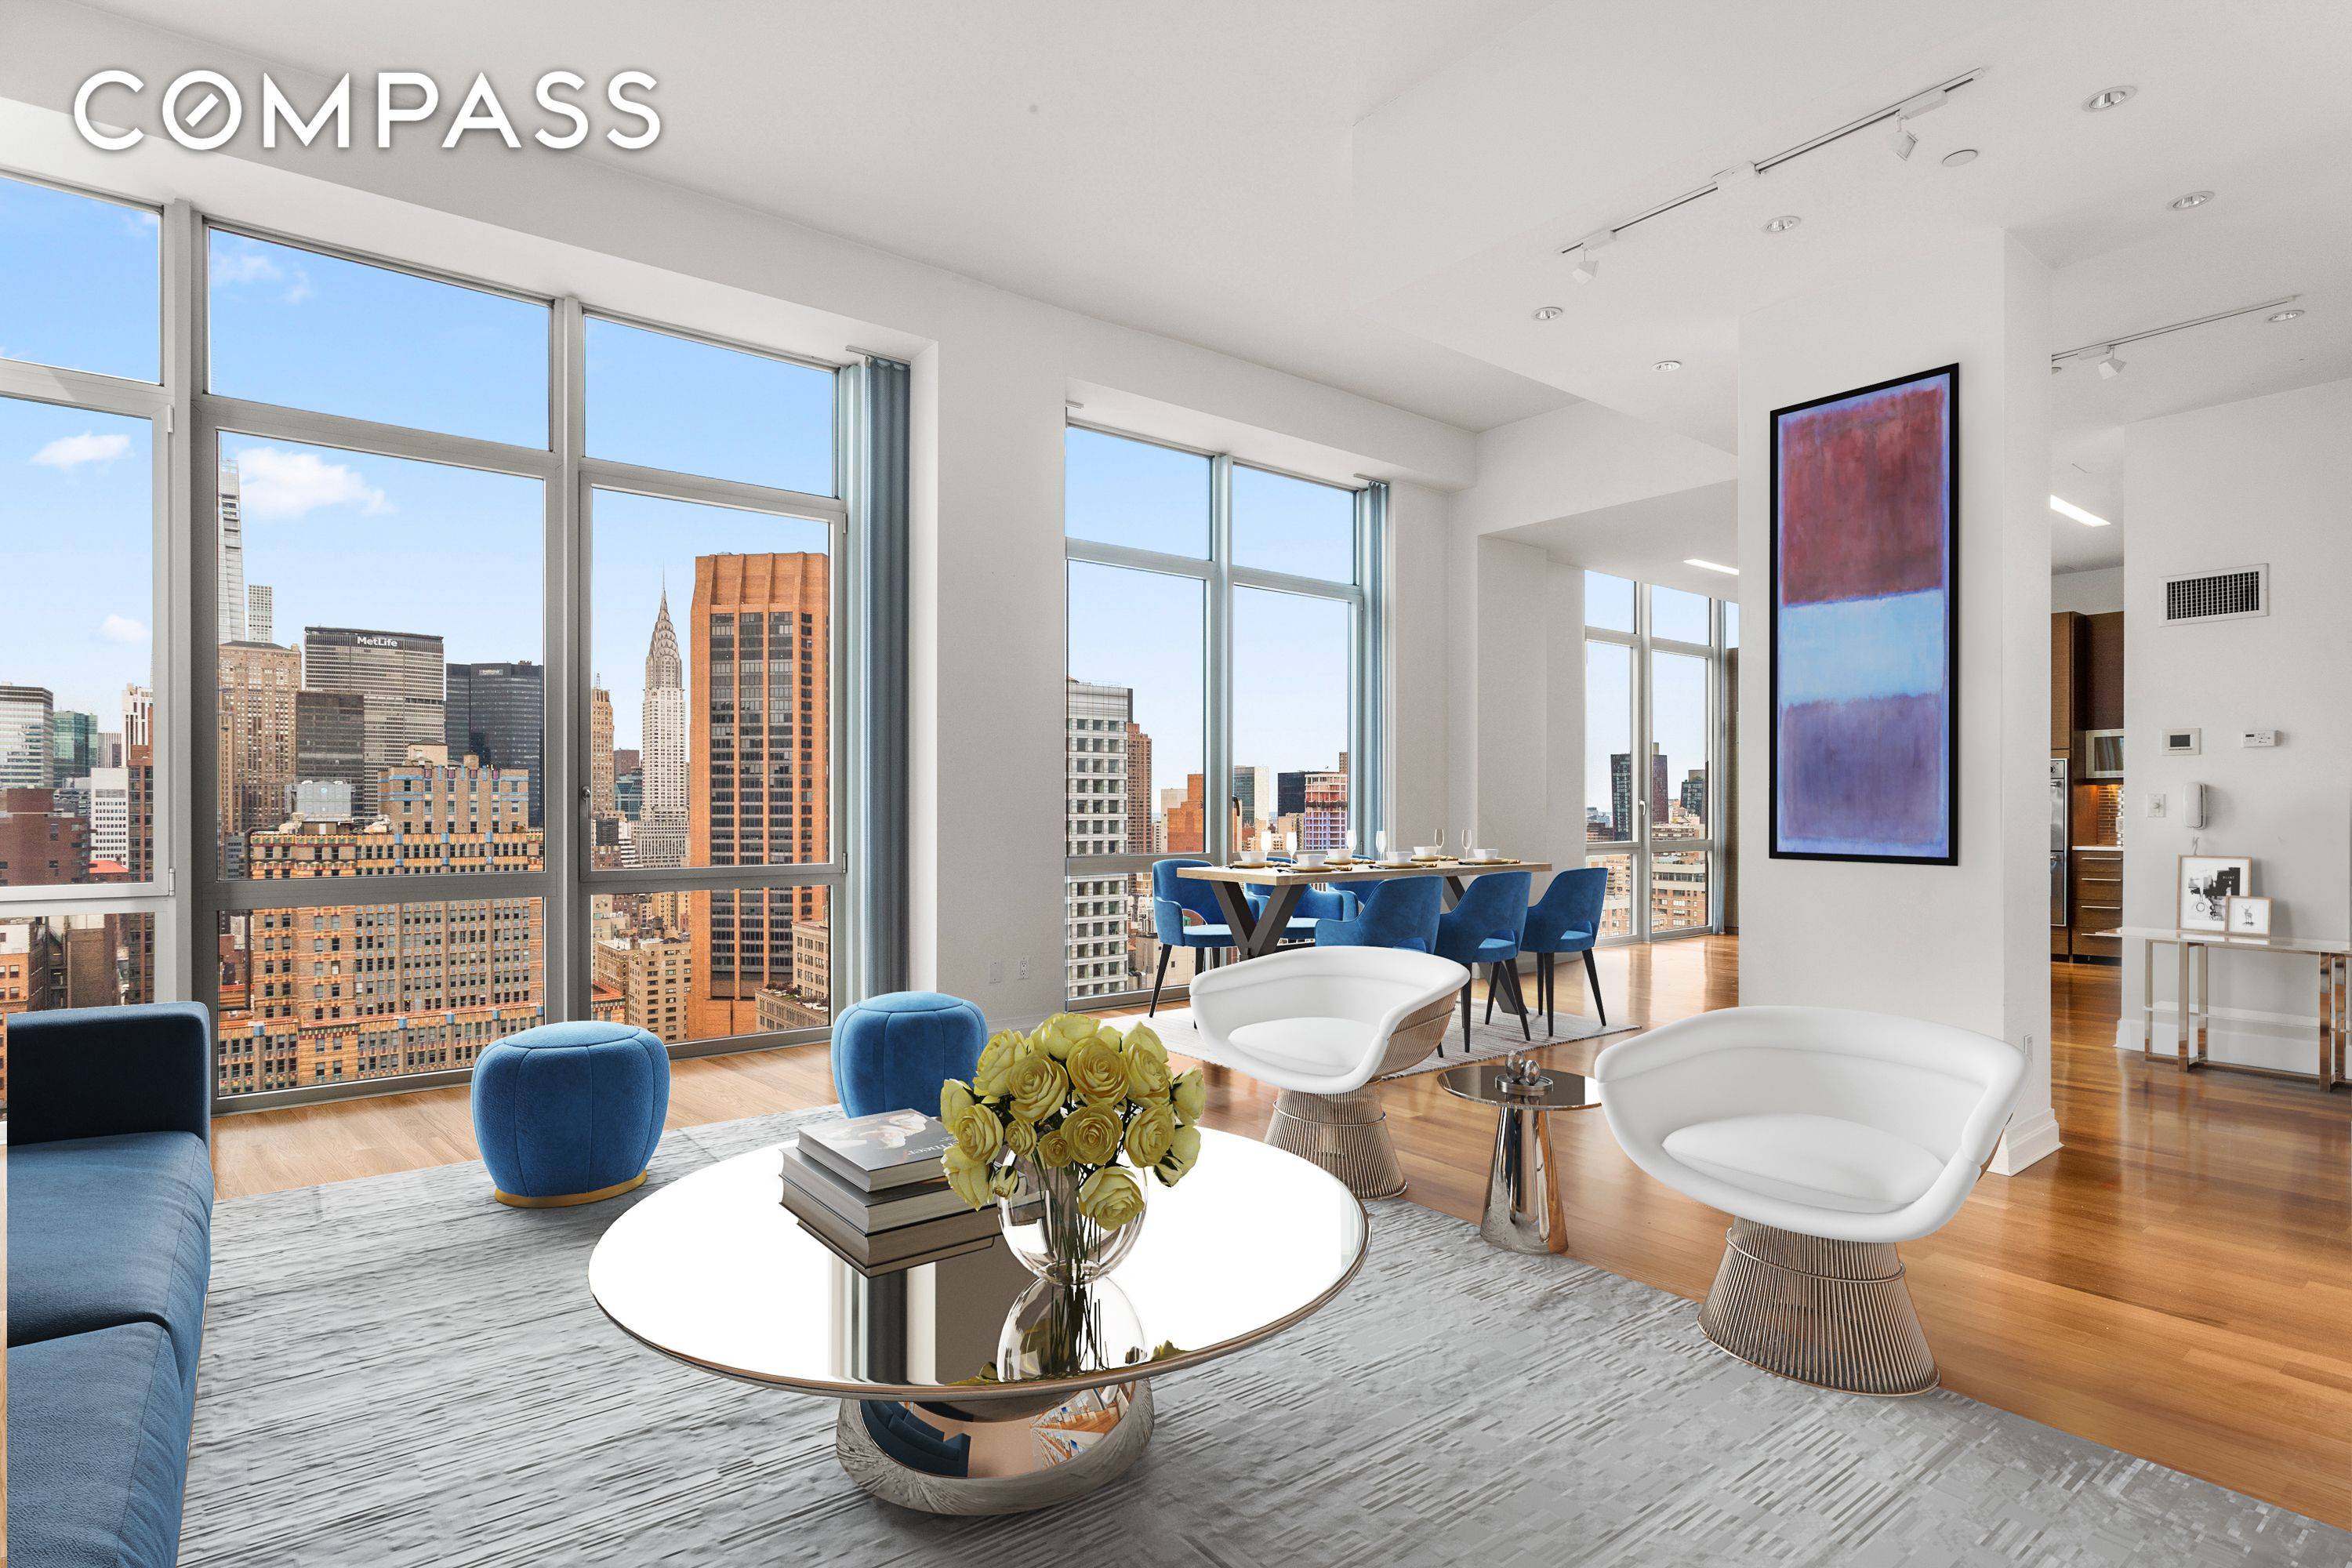 WITH 13' CEILINGS AND PANORAMIC VIEWS this chic NoMad penthouse s rooms are flooded with light and views.